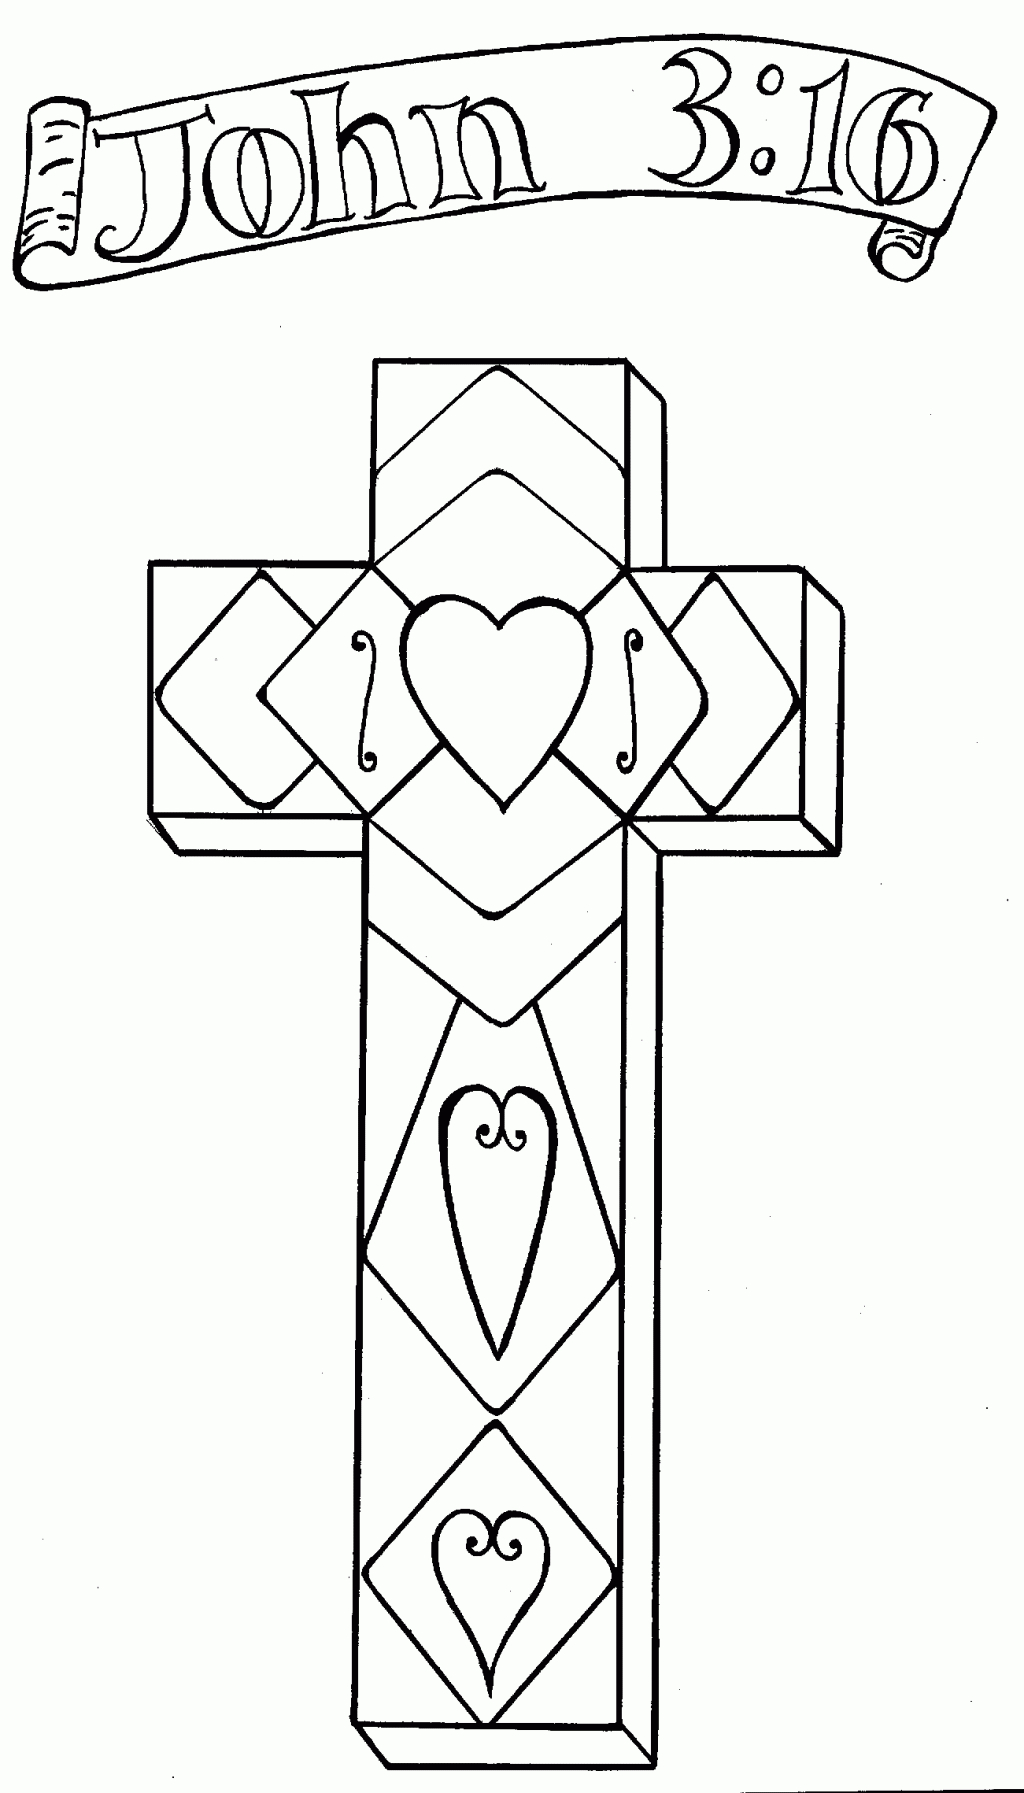 Coloring Pages ~ Adult Coloring Pages Free Printable Religious For - Free Printable Religious Easter Bookmarks